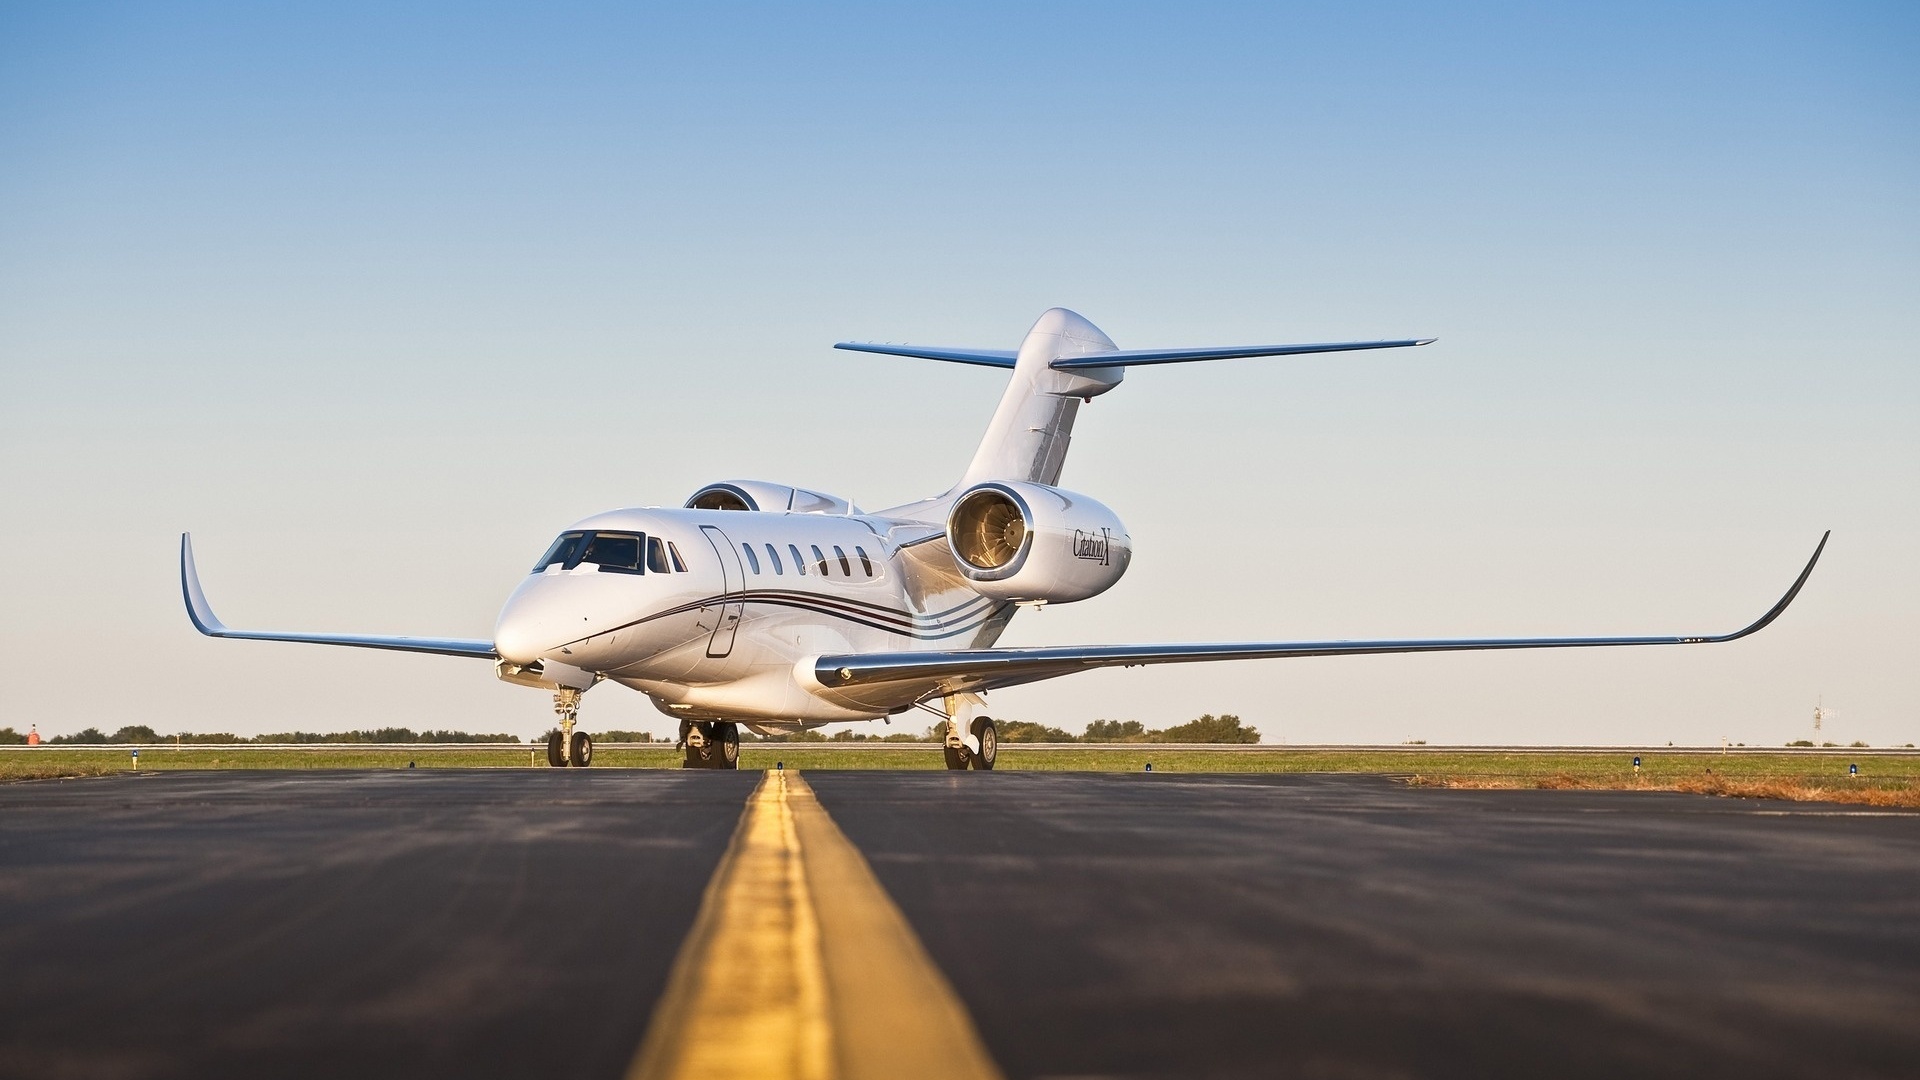 Private Jet Wallpaper HD Px High